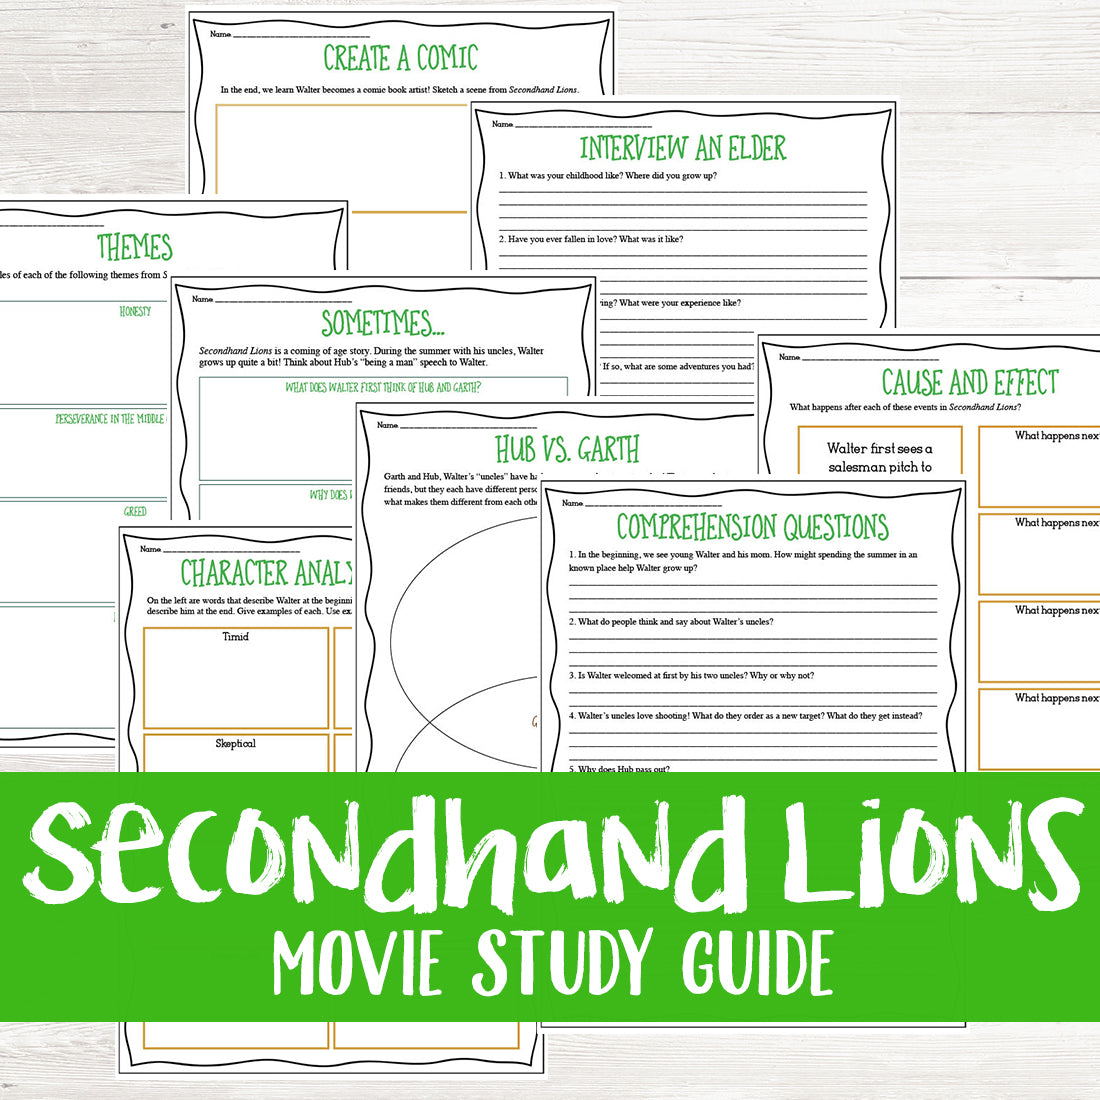 Secondhand Lions Movie Study Grades: 4-7 – Learn in Color